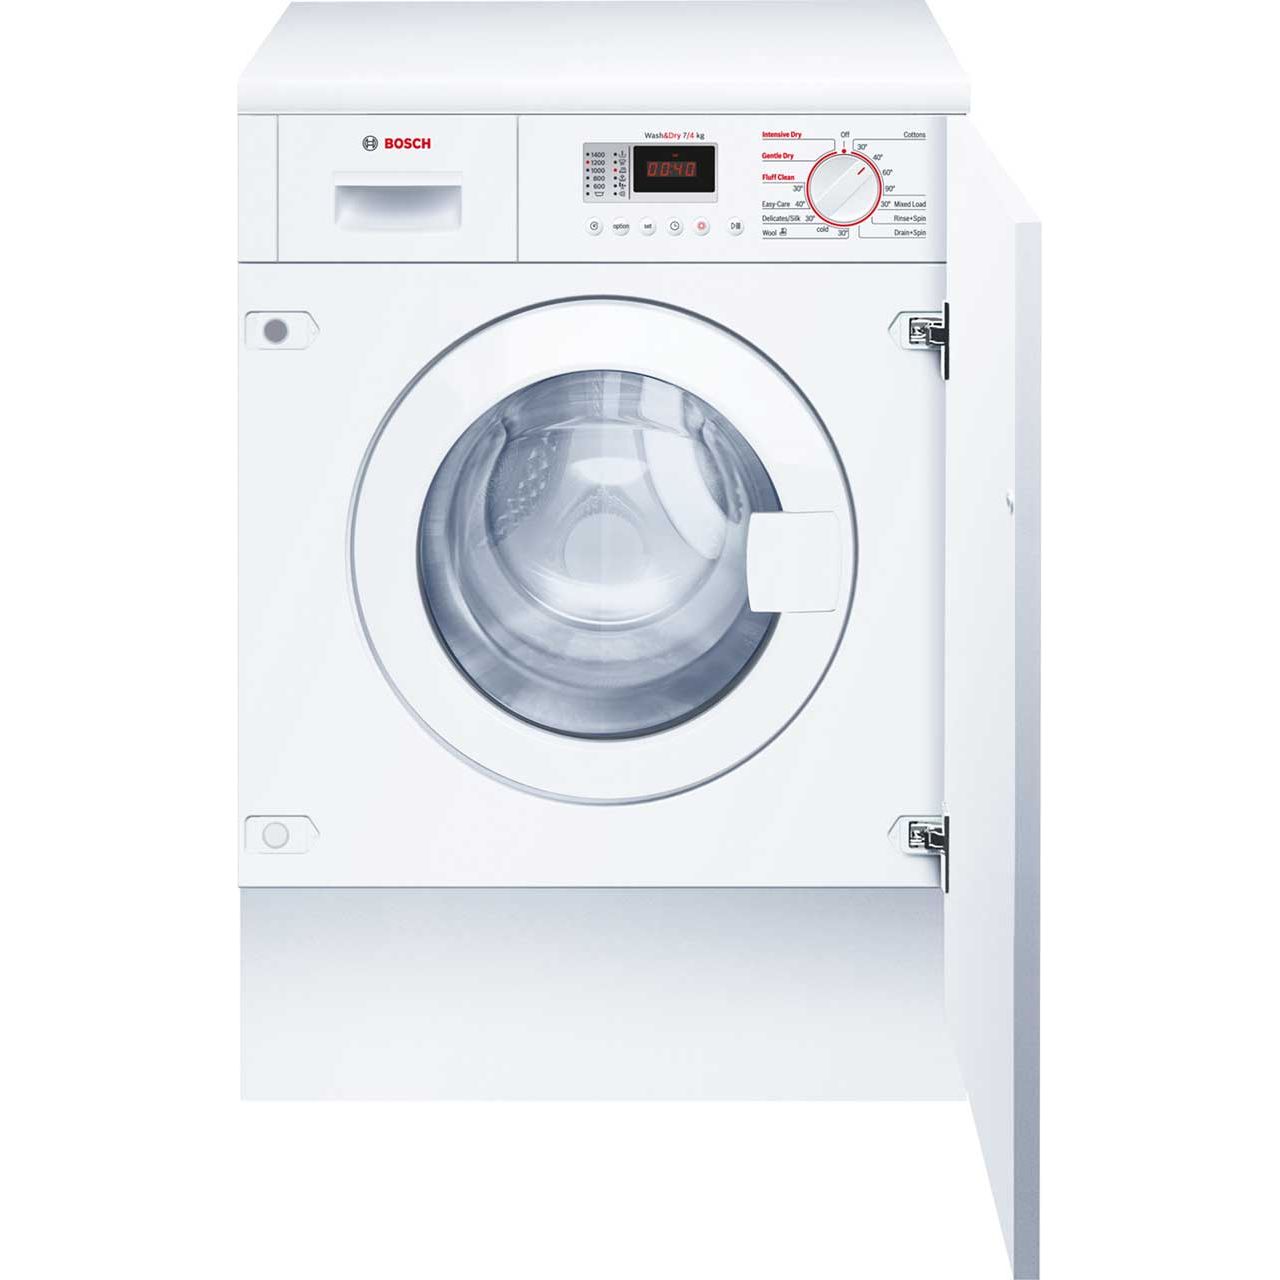 Bosch Serie 4 WKD28351GB Integrated 7Kg / 4Kg Washer Dryer with 1400 rpm Review